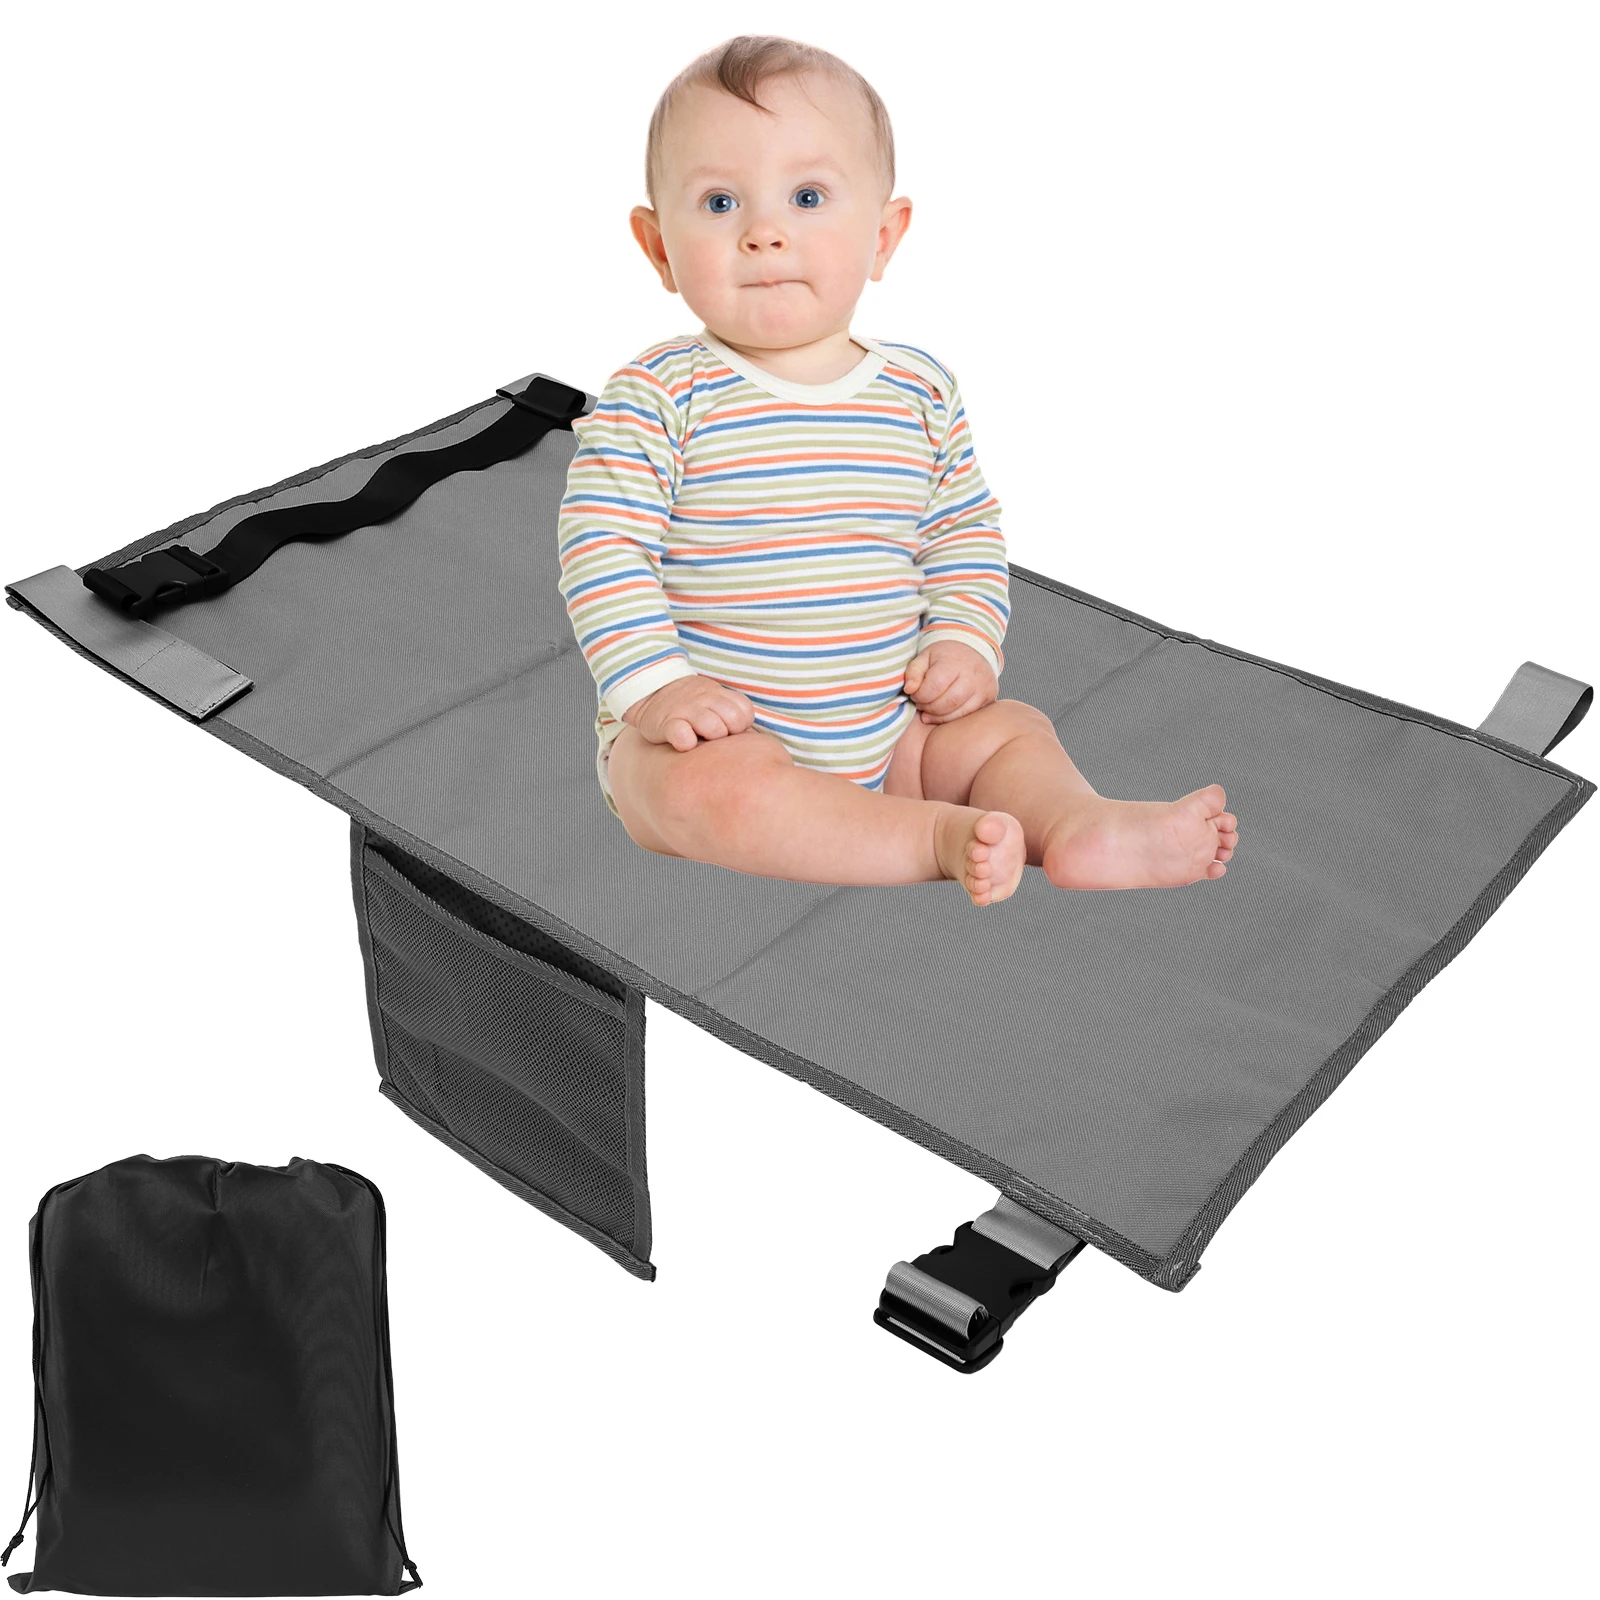 Kids Travel Airplane Bed Portable Children Pedals Beds Foot Leg Rest Hammock Baby Footrest Bed Toddler Airplane Seat Extender